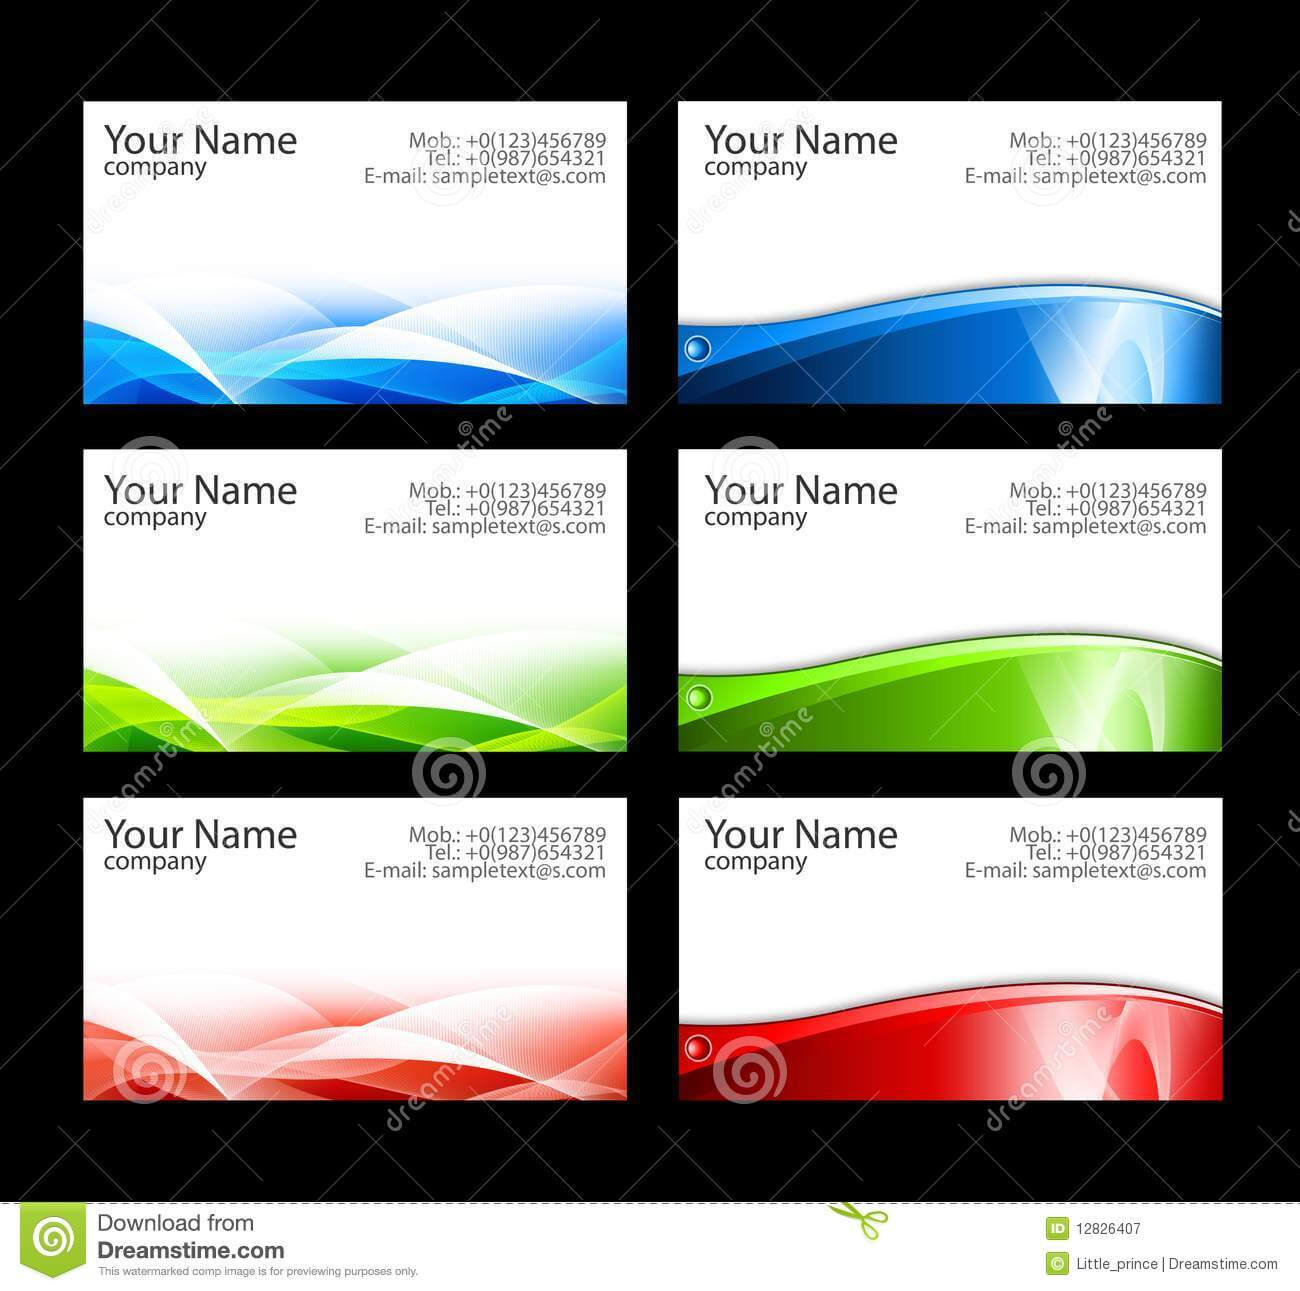 15 Free Avery Business Card Templates Images – Free Business With Calling Card Free Template